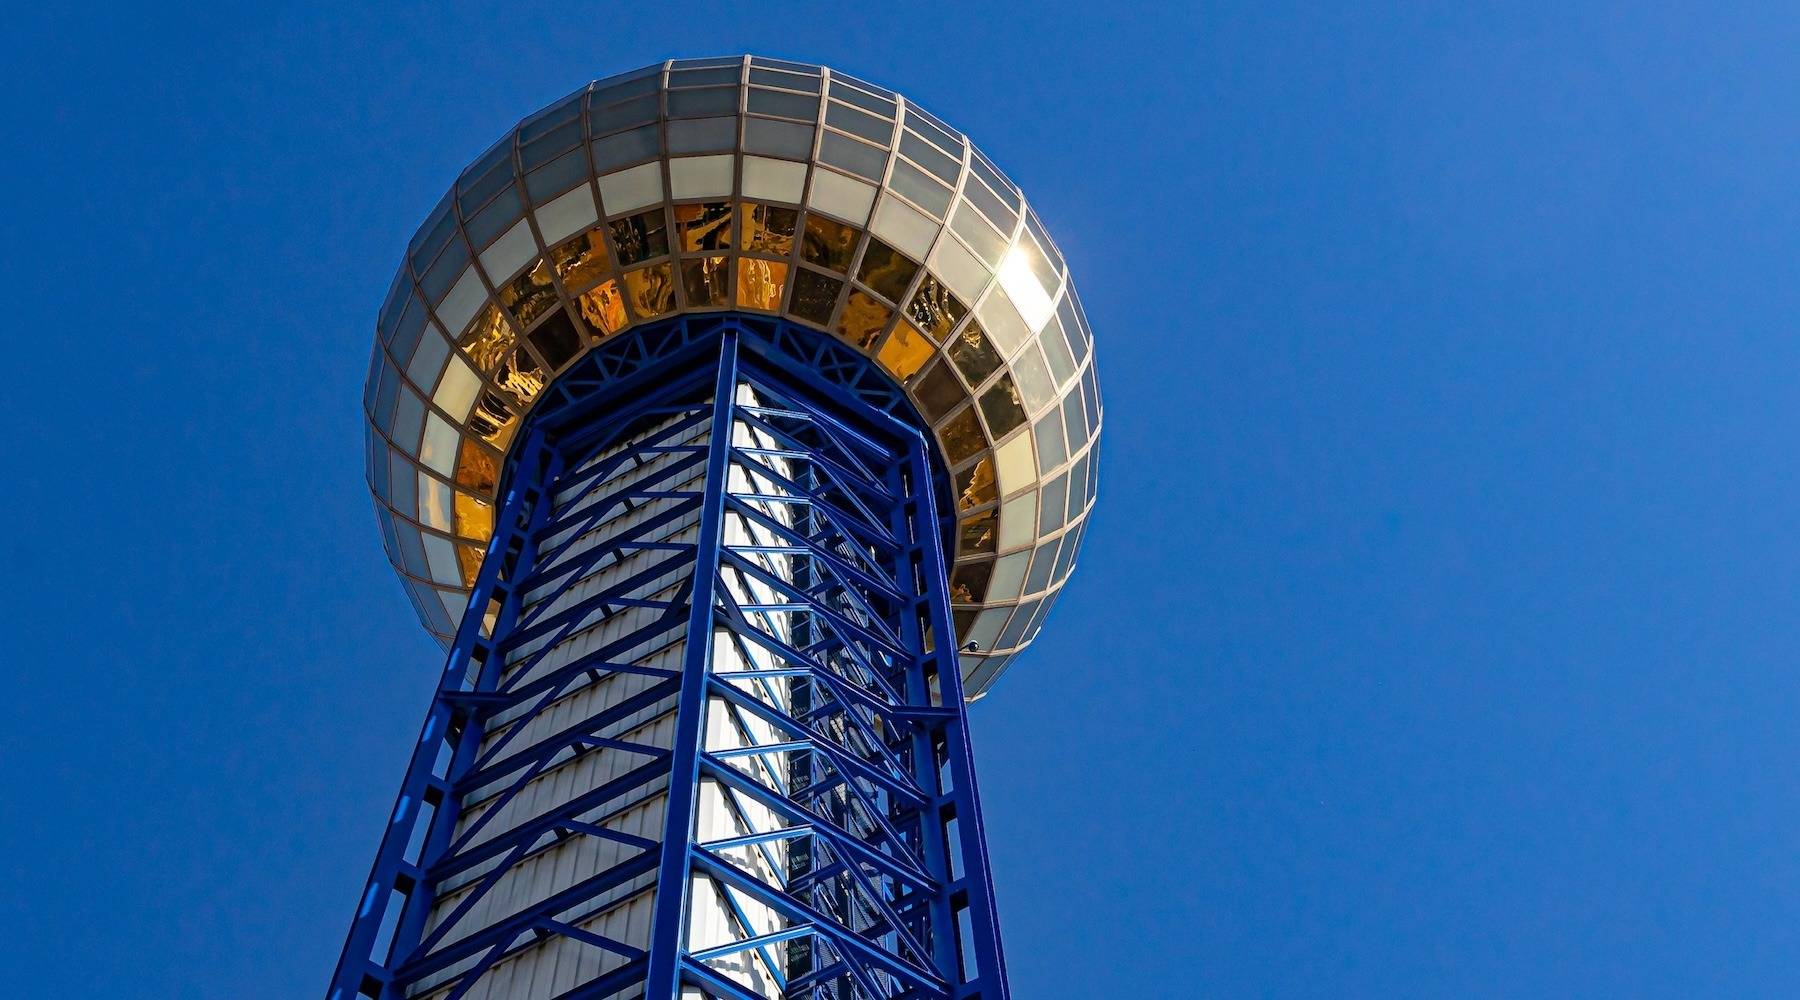 Weird Appalachia: How “The Simpsons” saved the Sunsphere